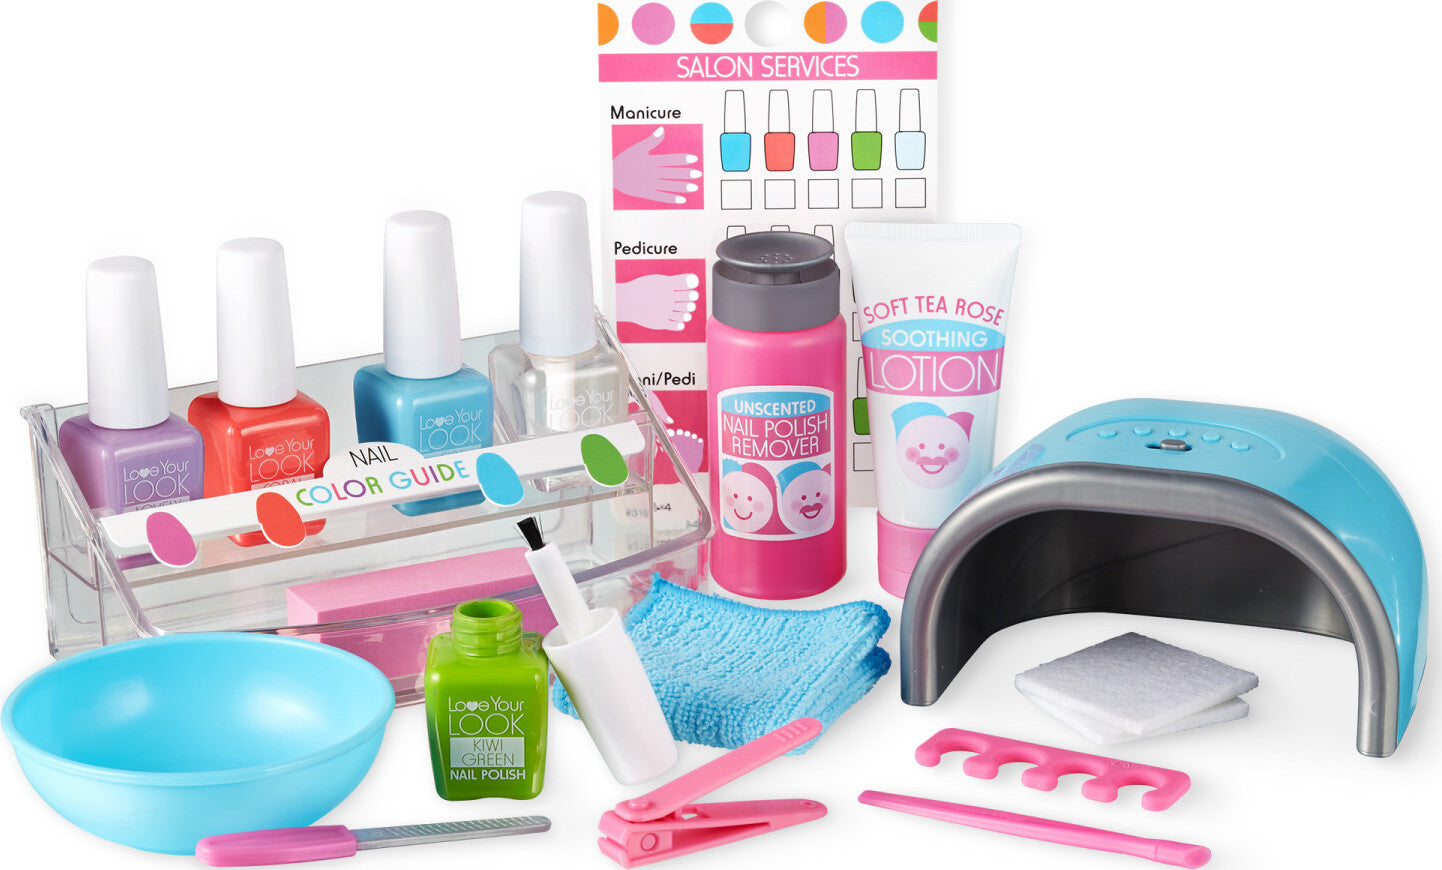 Love Your Look - Nail Care Play Set